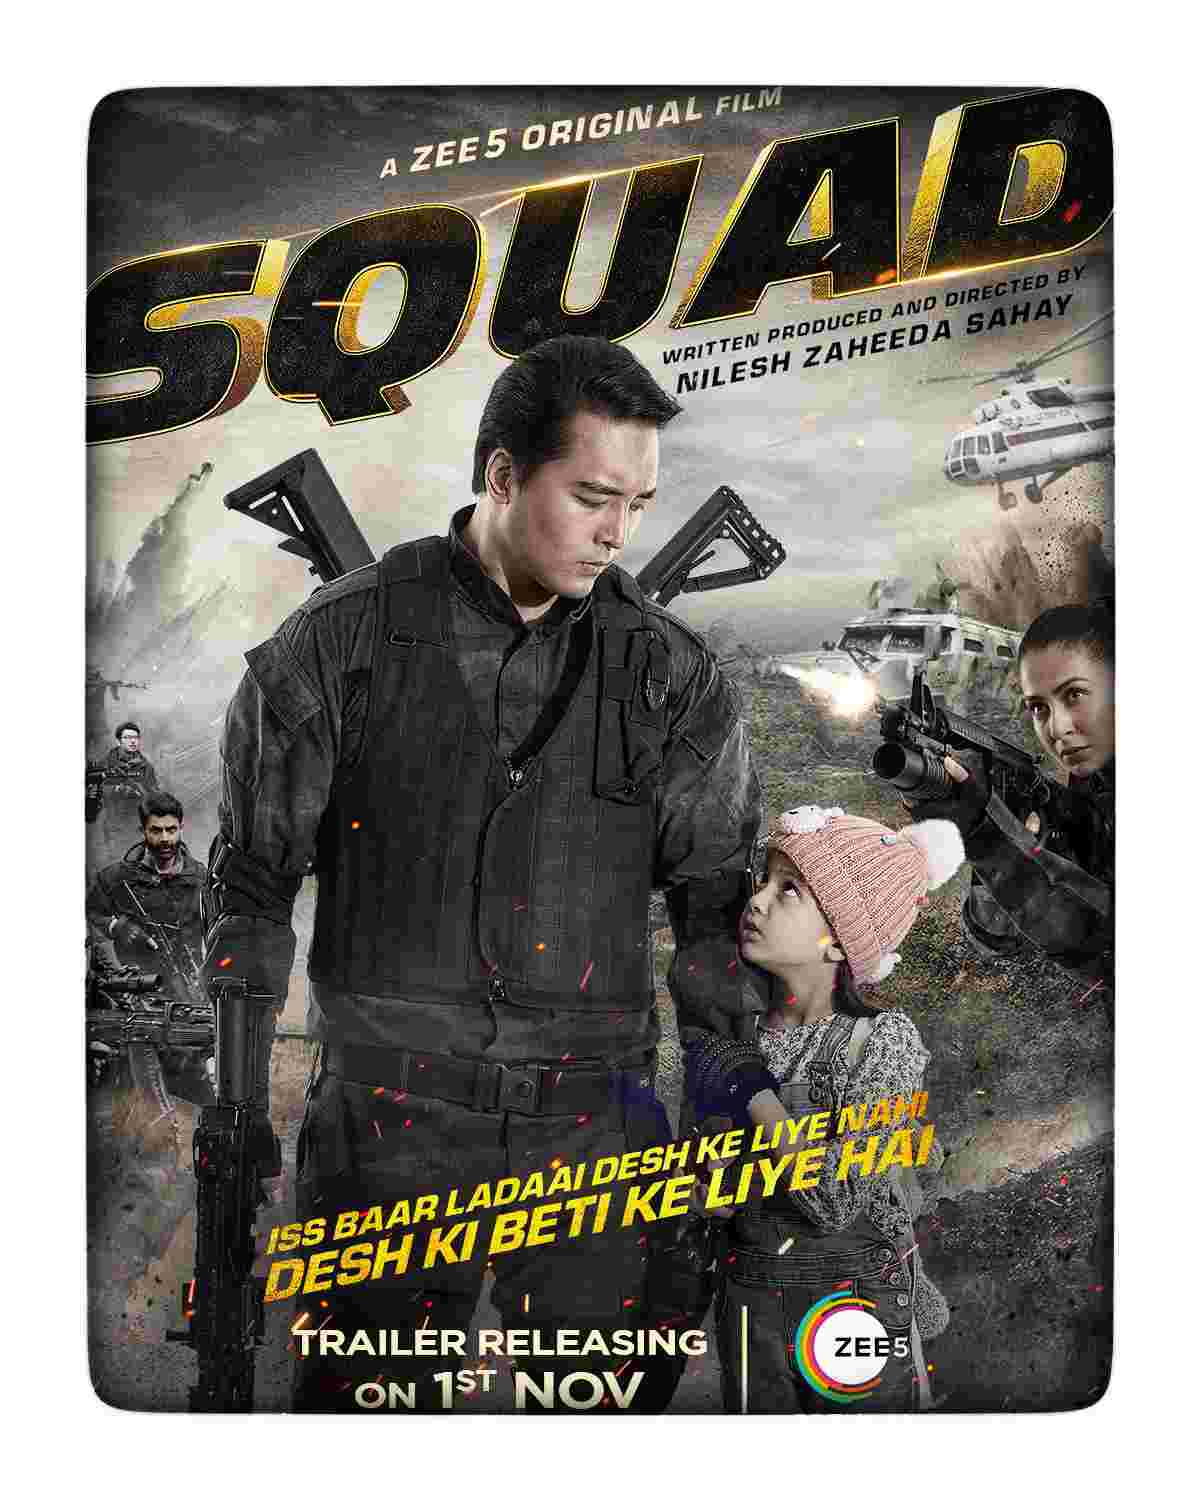 Squad (Zee5) film 2021 download In HD 480p 720p 1080p | Squad Zee5 Movie 2021 Wiki Detail